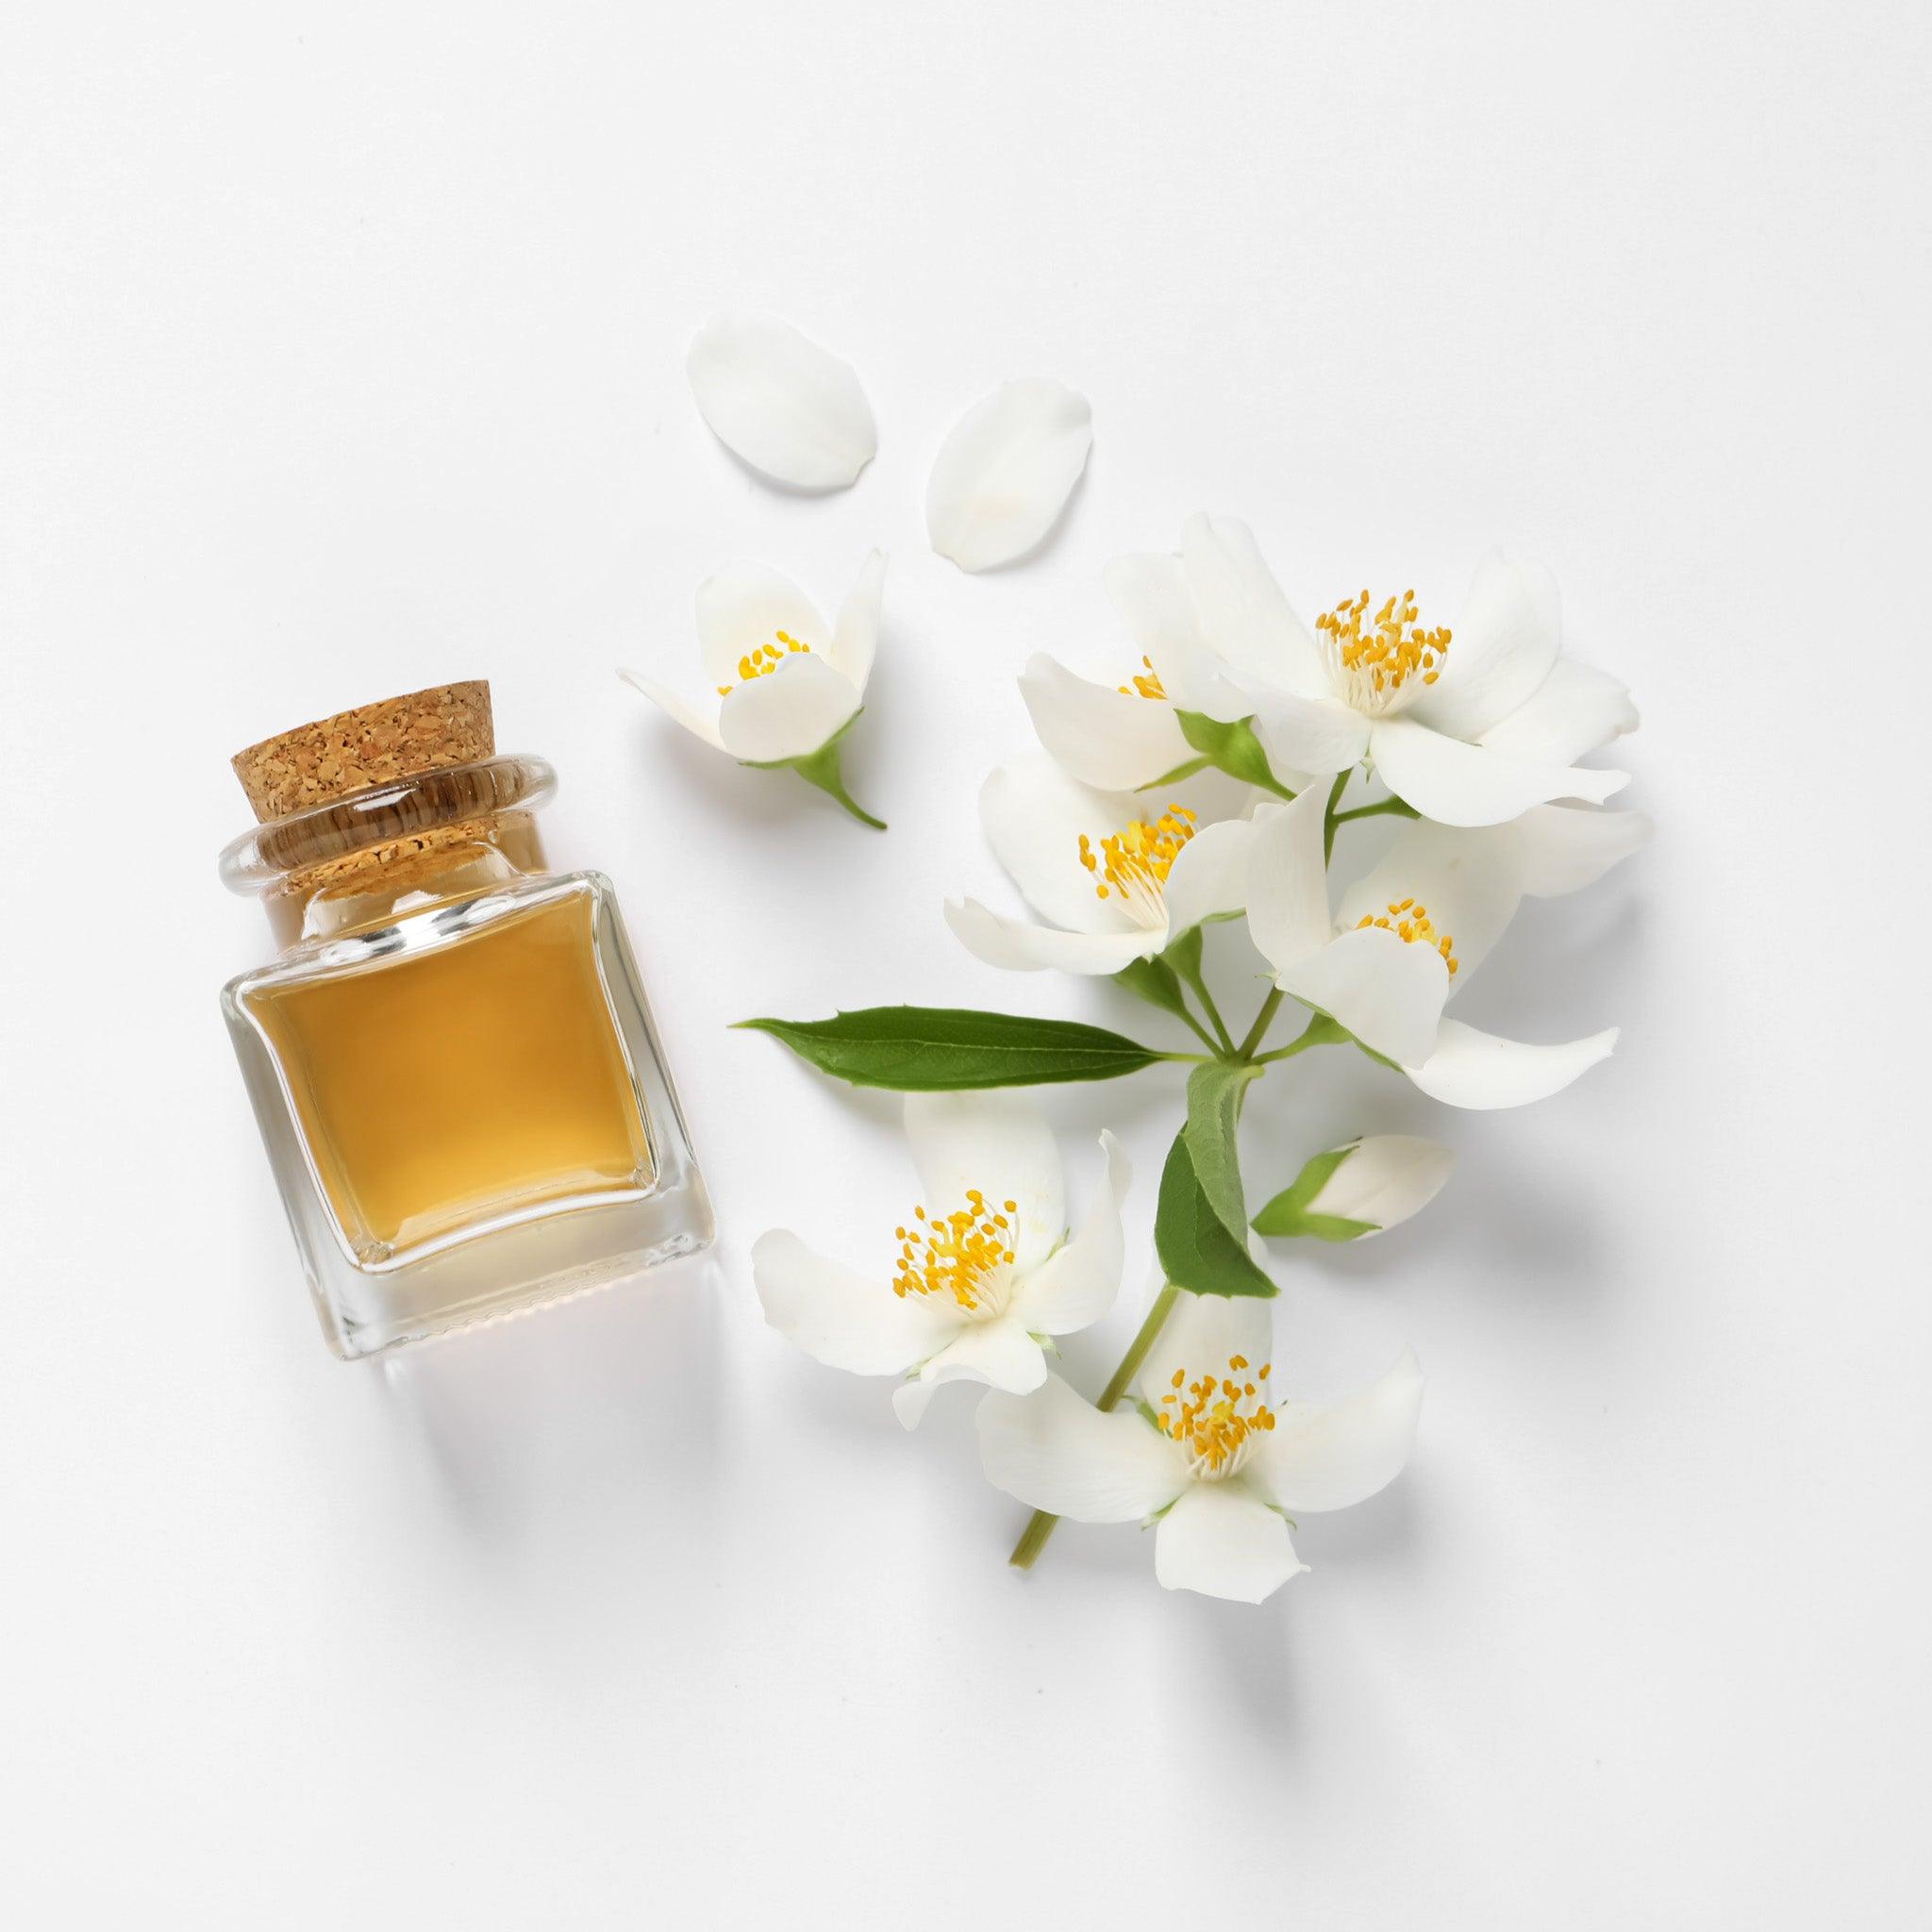 Jasmine Essential Oil: Superb Beauty Benefits Of This Floral